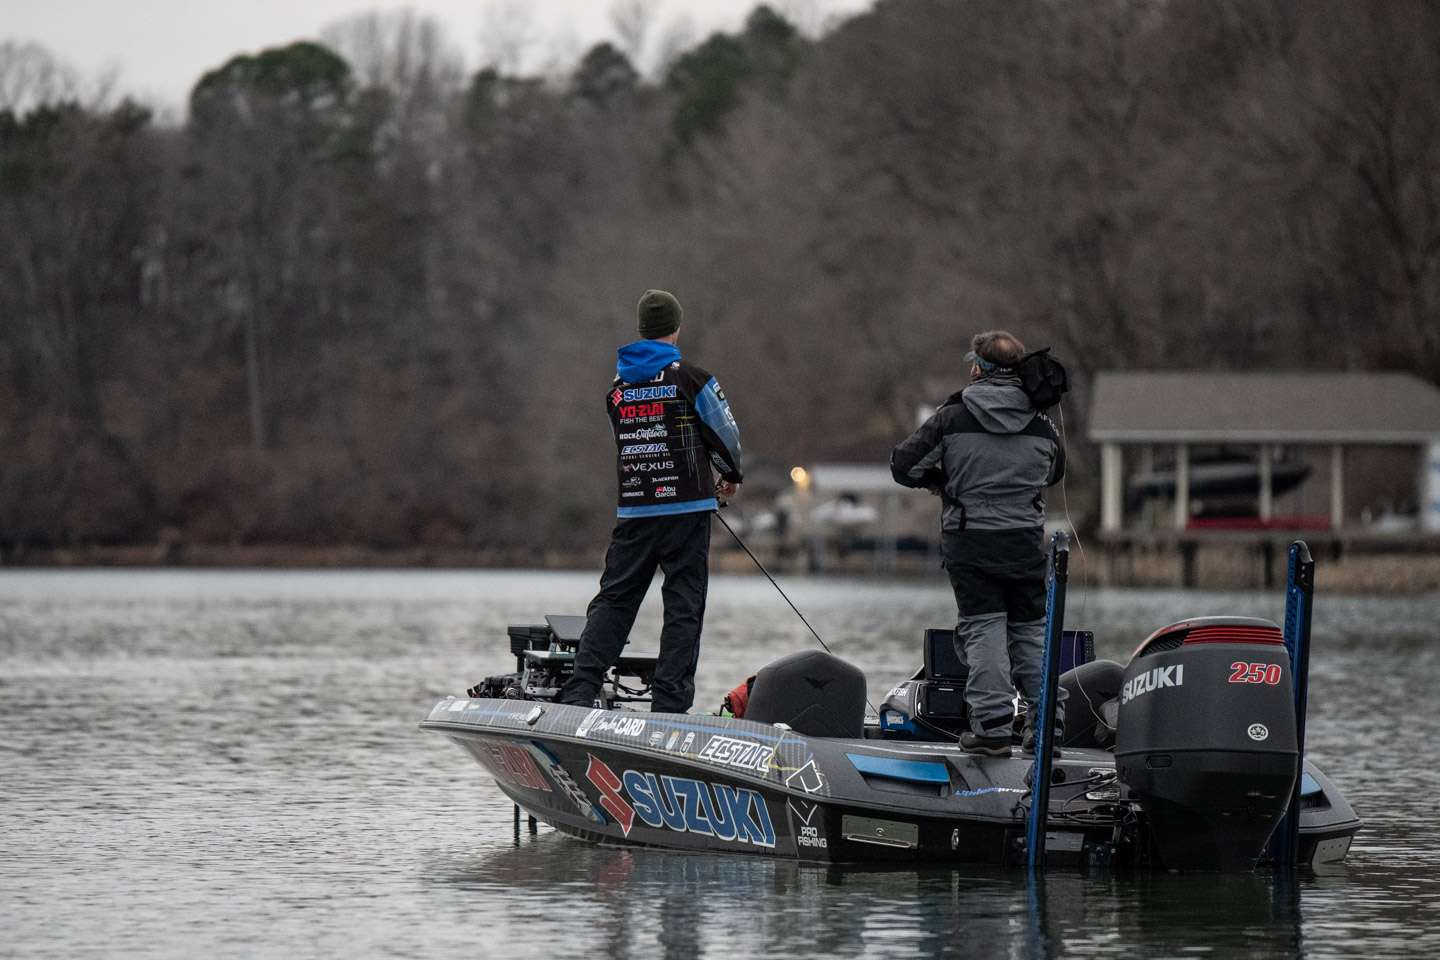 Catch up with Brandon Card as he takes on Day 2 of the 2021 Guaranteed Rate Bassmaster Elite at Tennessee River!